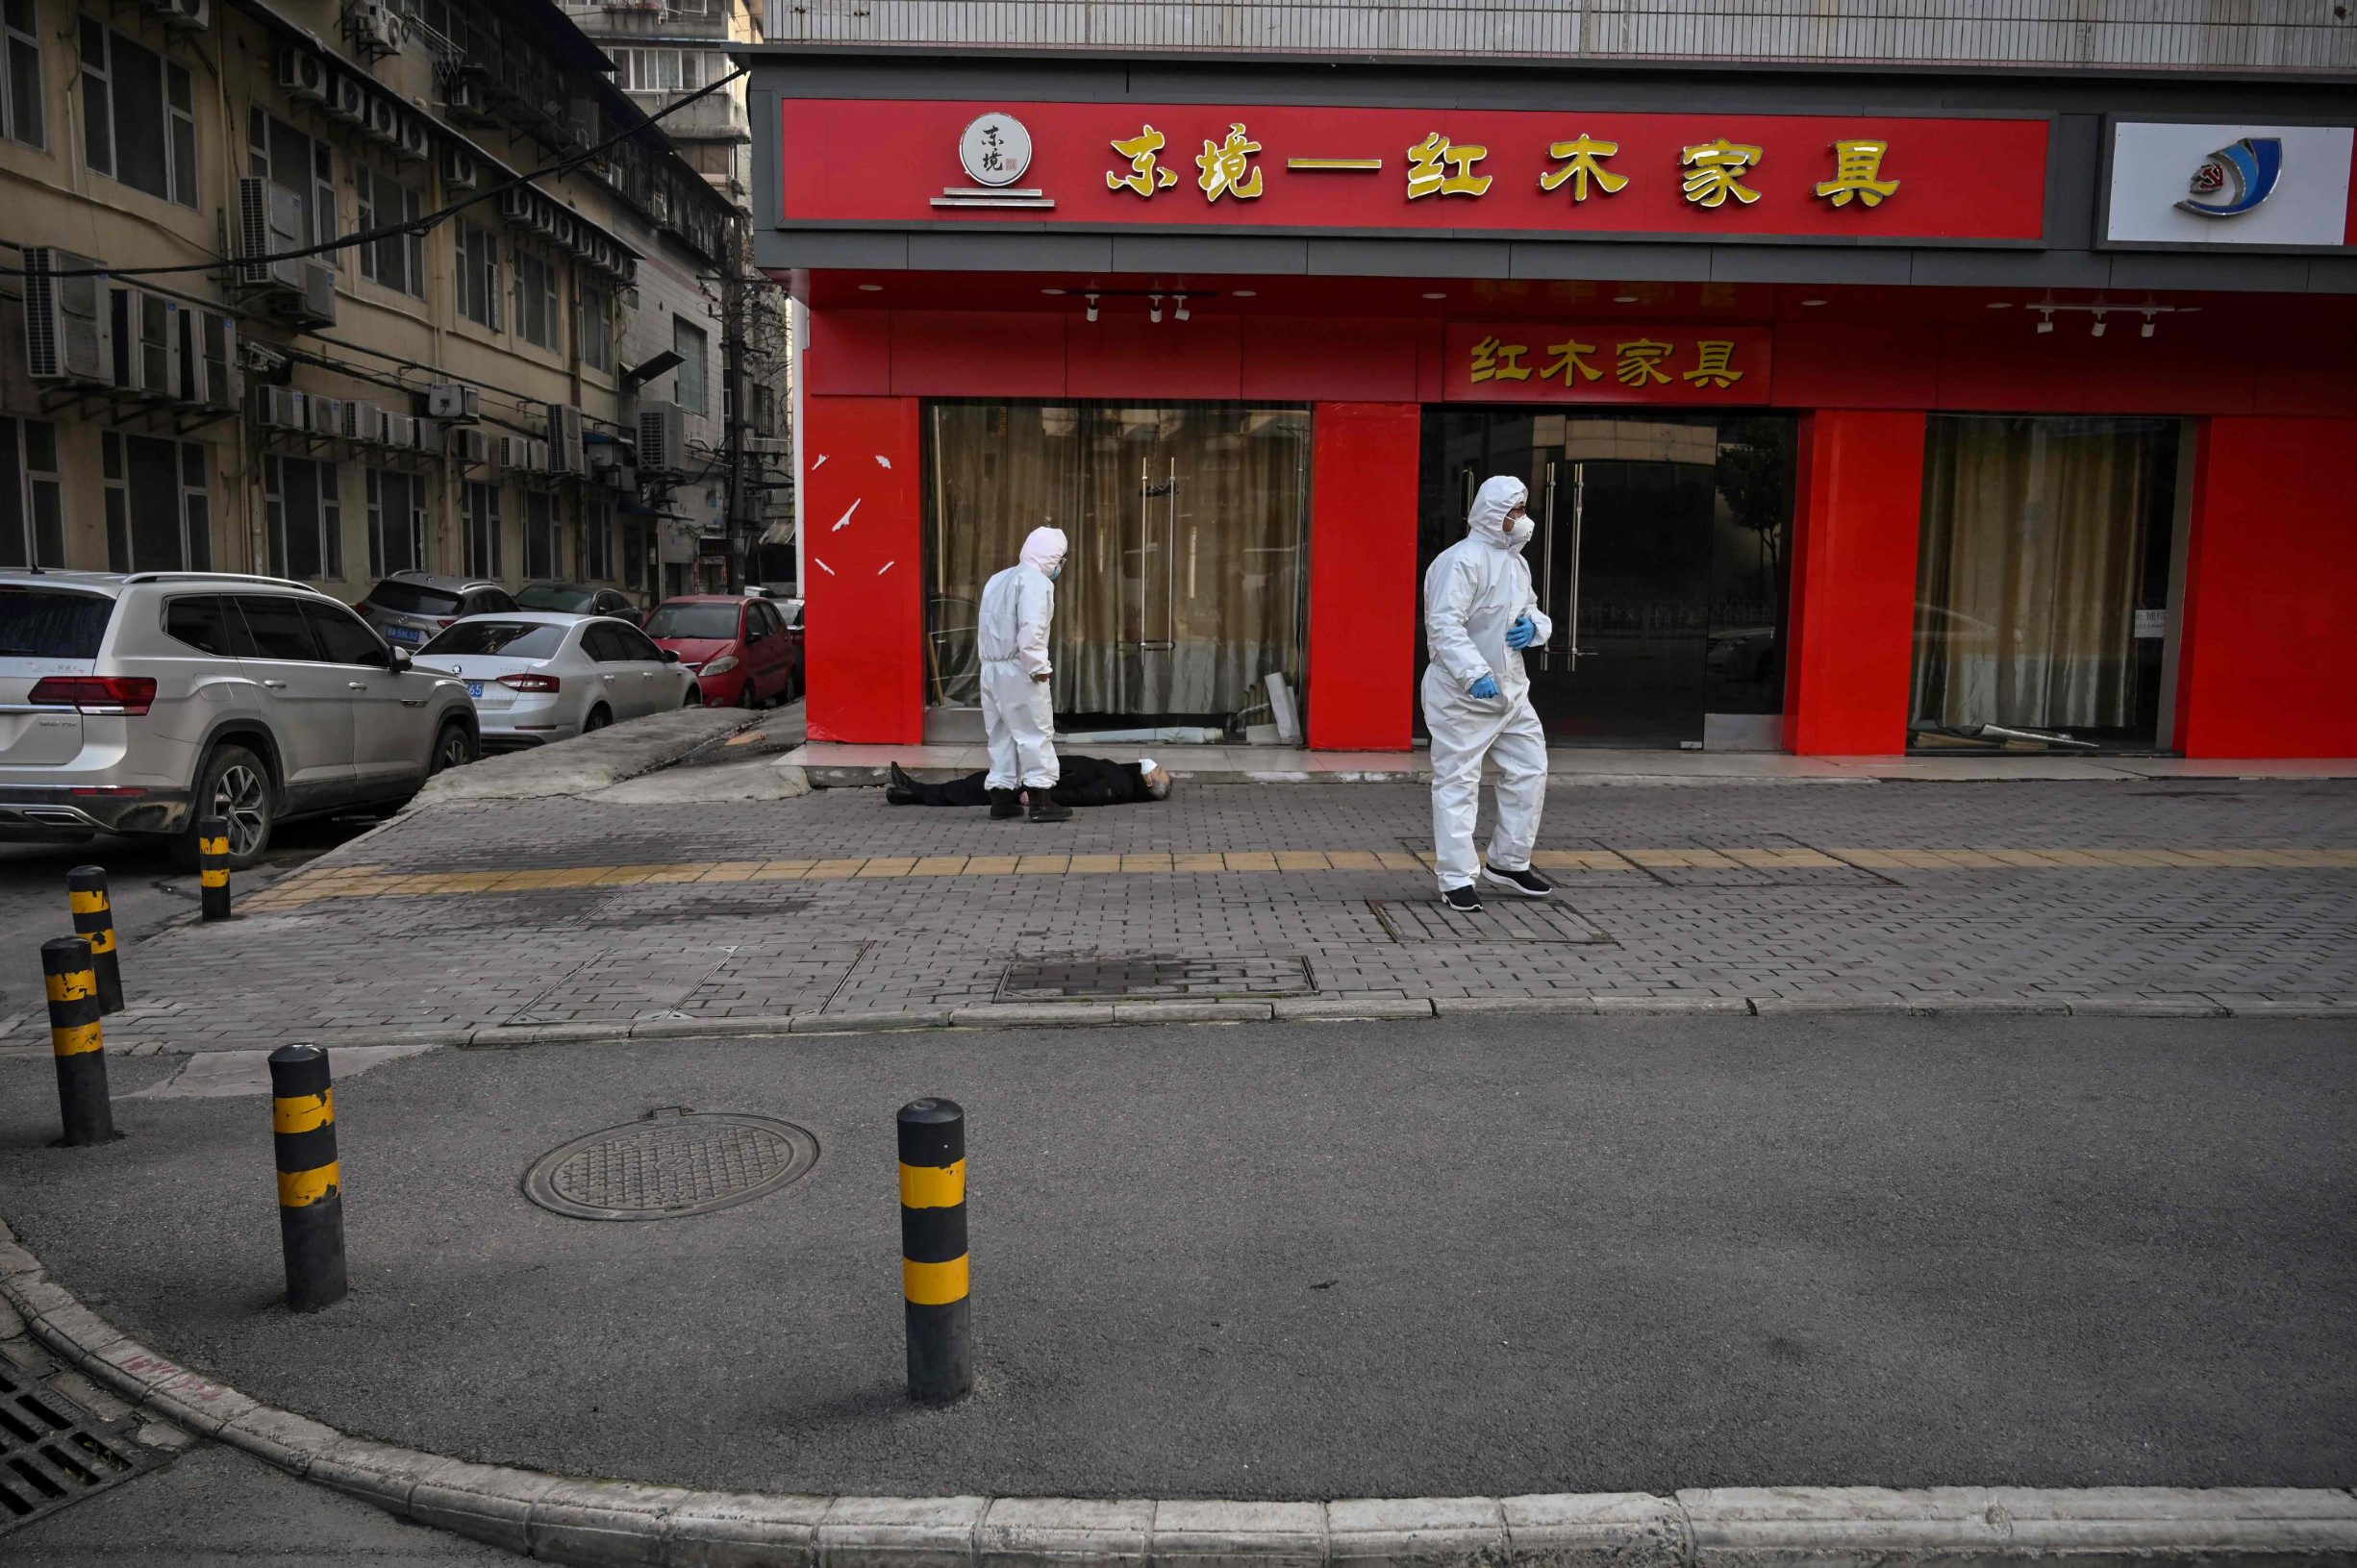 This photo taken on January 30, 2020 shows officials in protective suits checking on an elderly man wearing a facemask who collapsed and died on a street near a hospital in Wuhan. - AFP journalists saw the body on January 30, not long before an emergency vehicle arrived carrying police and medical staff in full-body protective suits. The World Health Organization declared a global emergency over the new coronavirus, as China reported on January 31 the death toll had climbed to 213 with nearly 10,000 infections. (Photo by Hector RETAMAL / AFP) / TO GO WITH China-health-virus-death,SCENE by Leo RAMIREZ and Sebastien RICCI